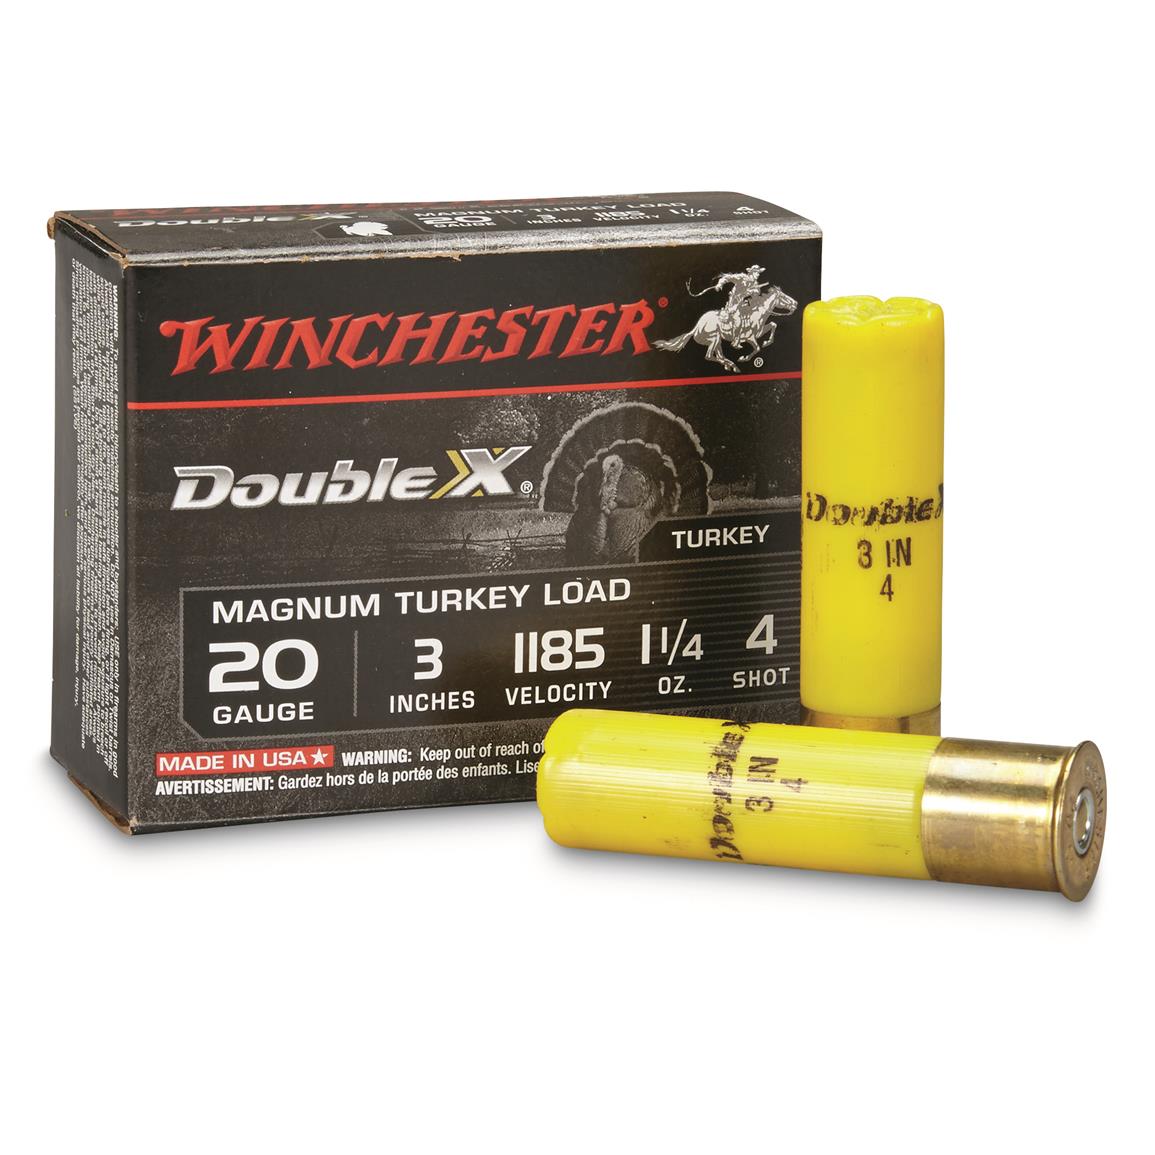 Winchester, 20 Gauge, 3", 1 1/4 oz., Supreme Double X Magnum Copper Plated Turkey Loads, 10 Rounds